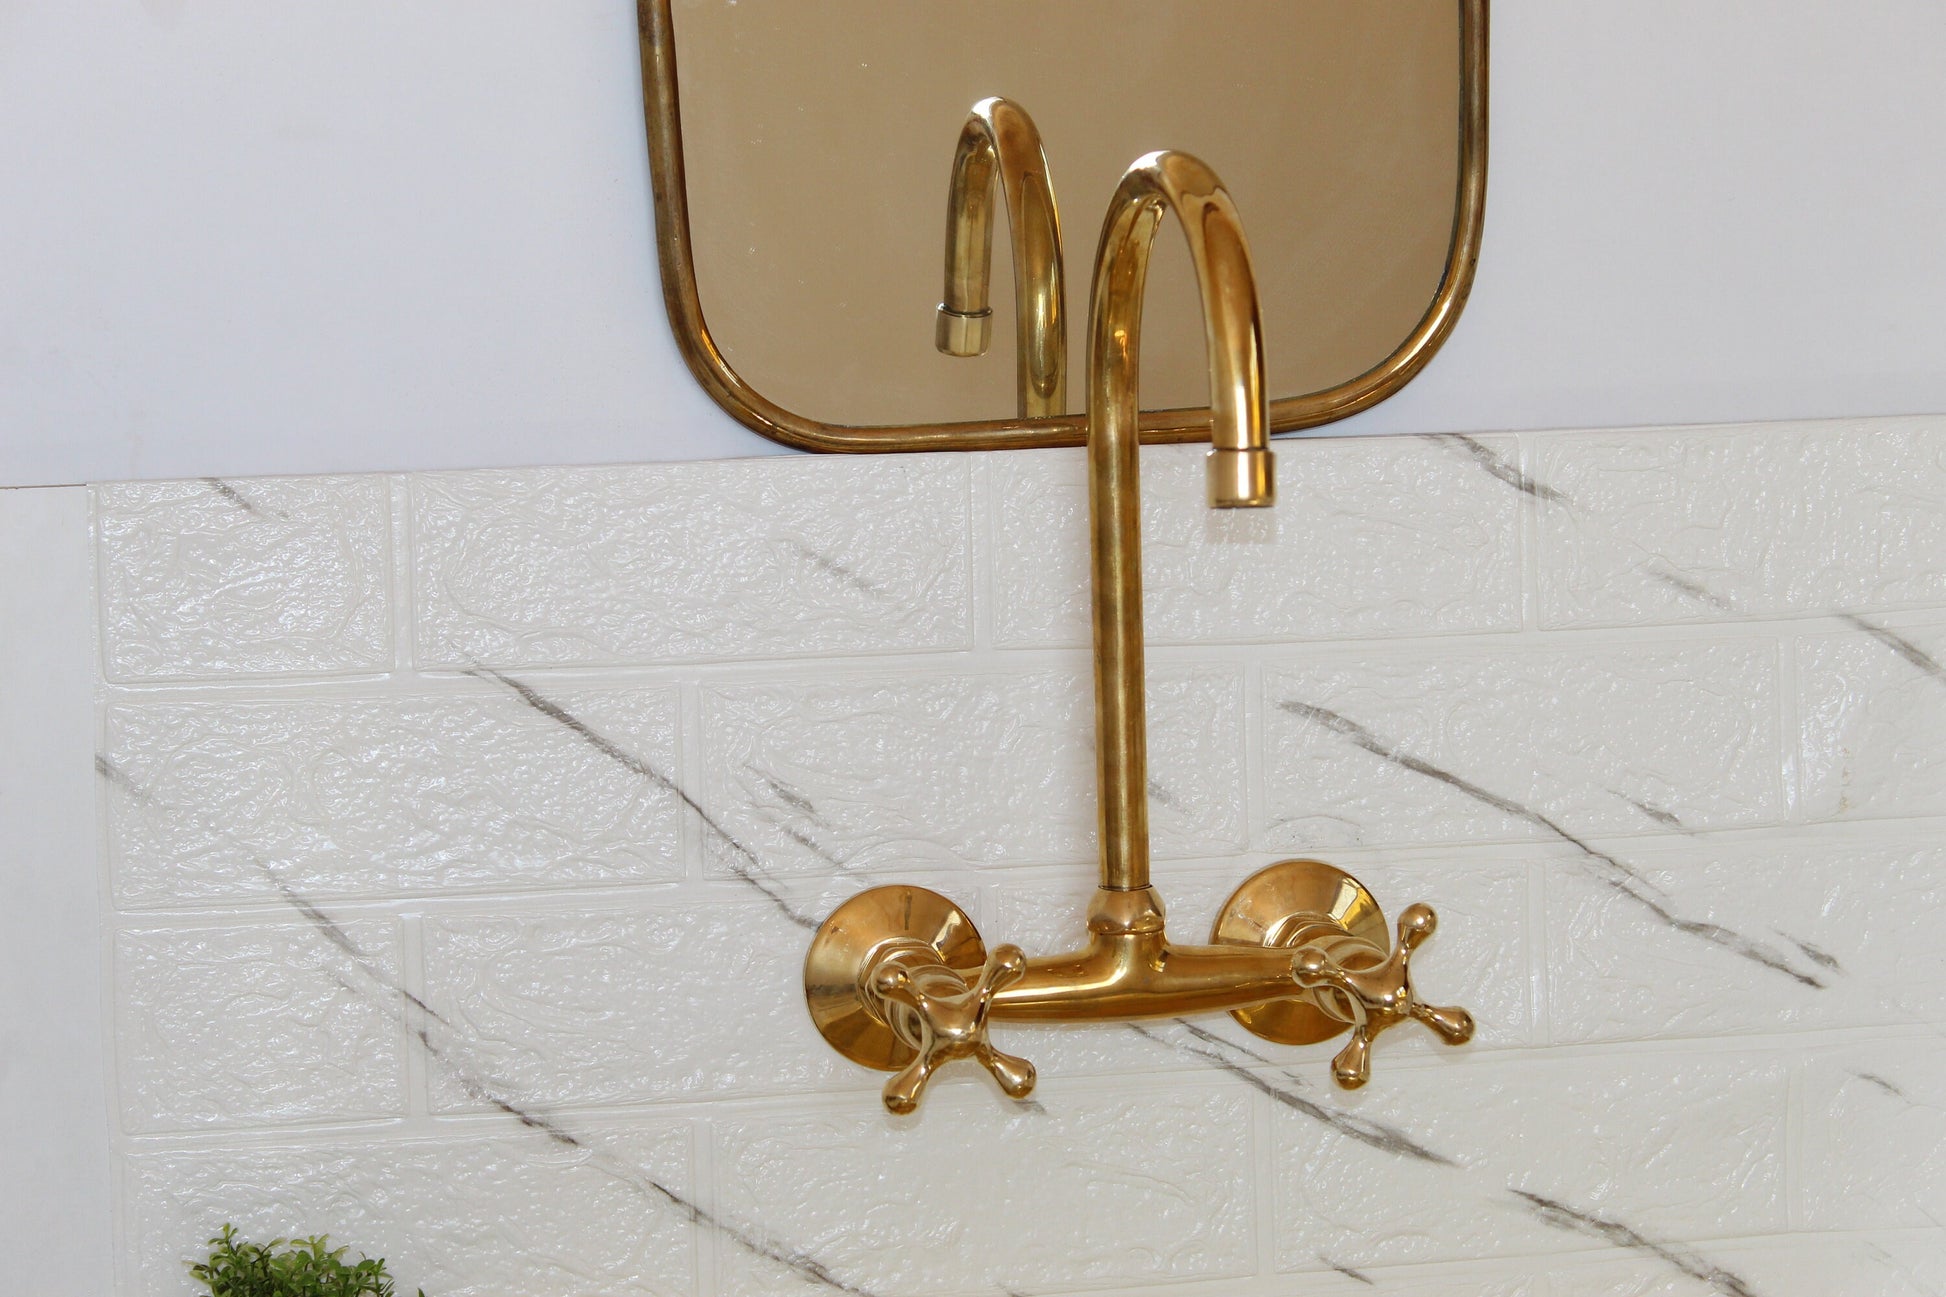 Antique-inspired Cross Handle Kitchen Faucet Zayian 